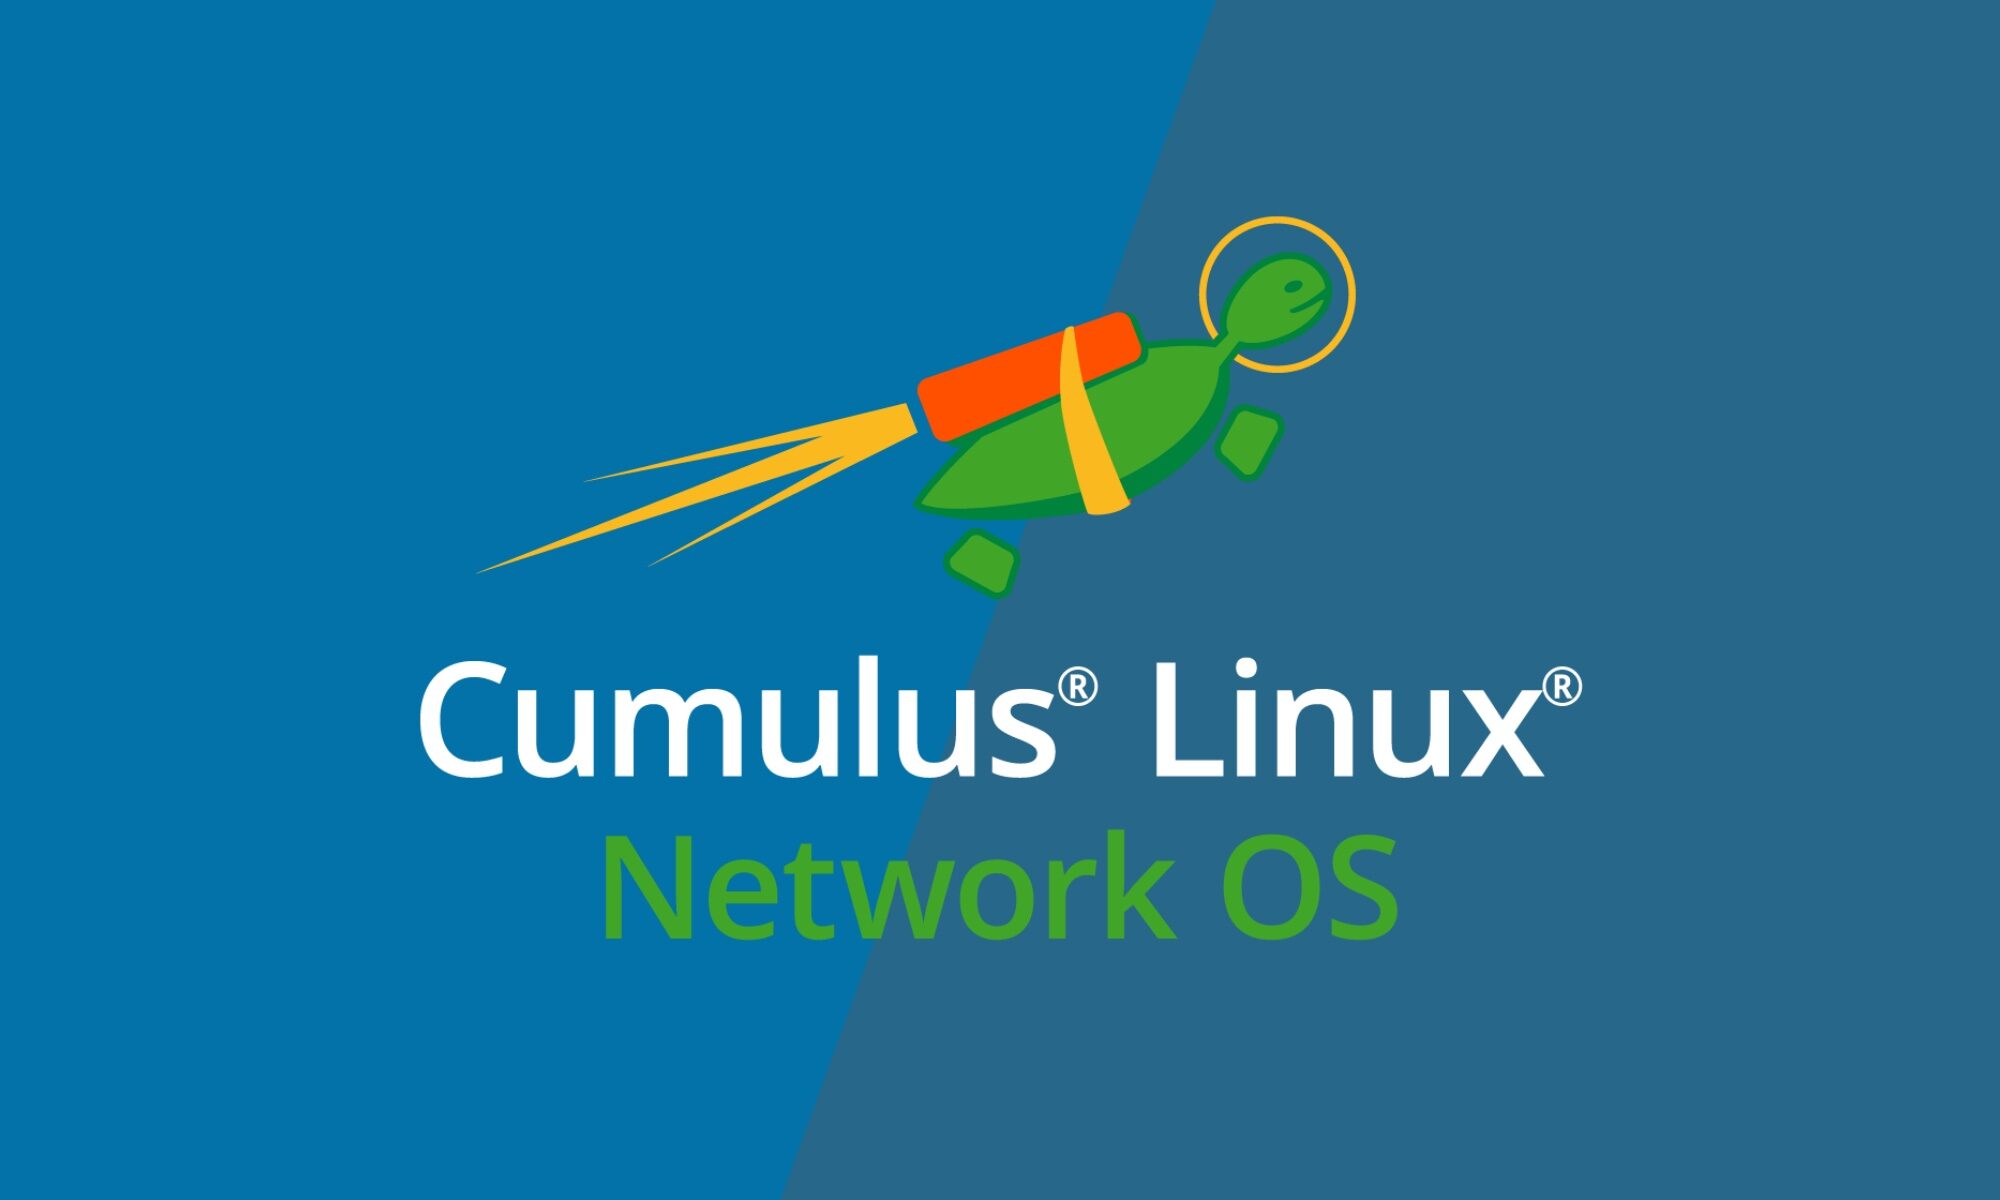 Cumulus Linux Network OS